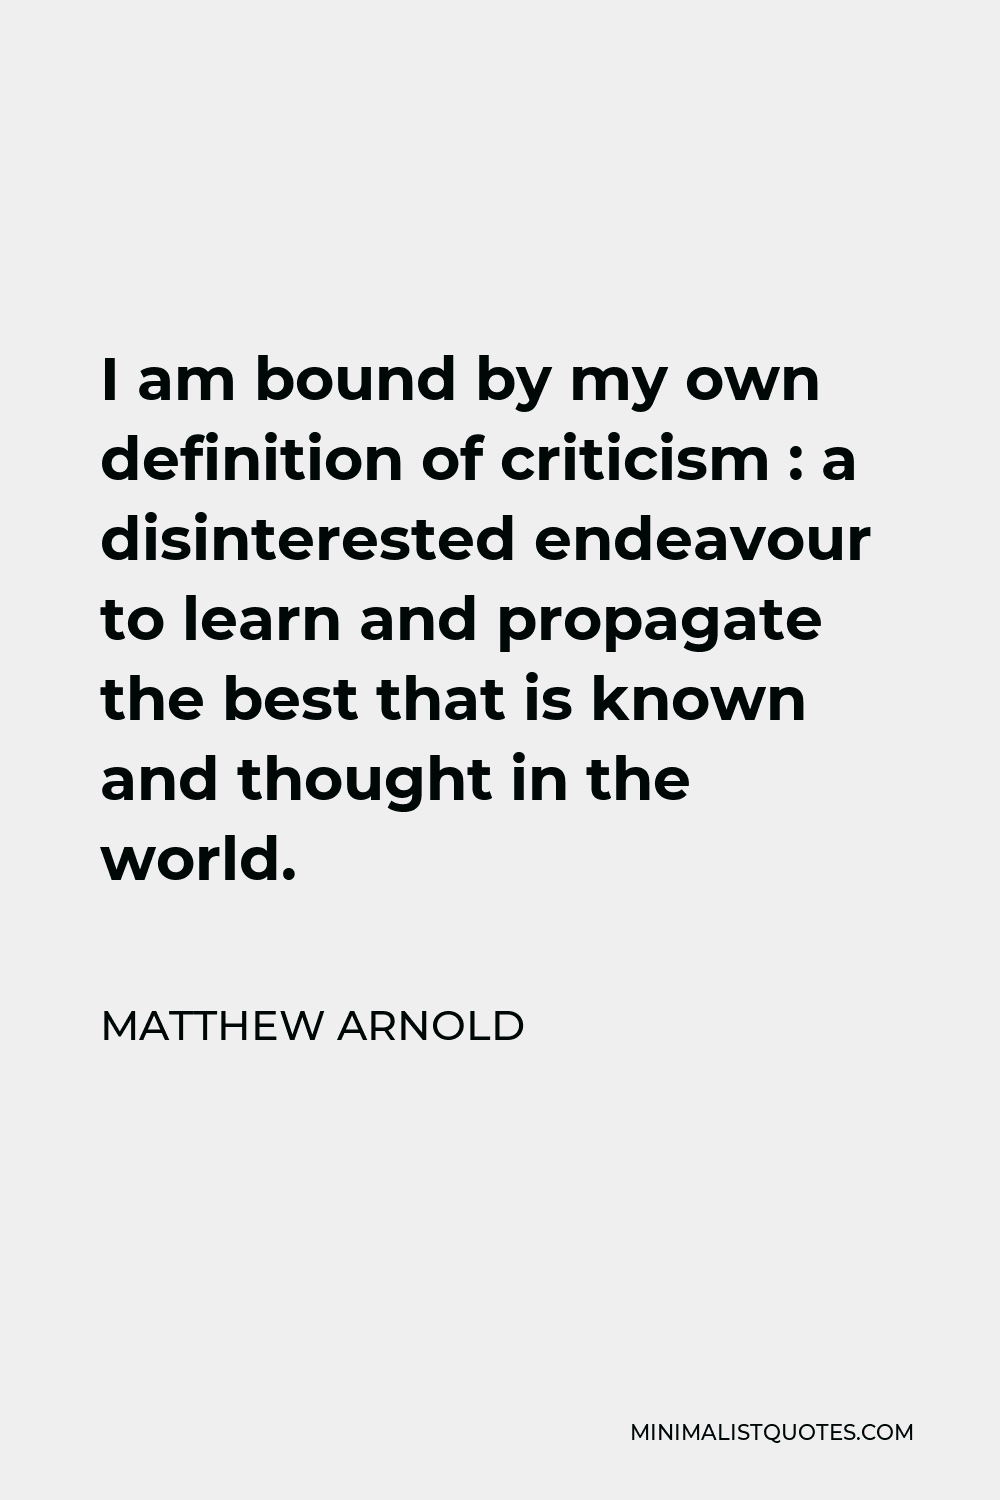 Matthew Arnold Quote - I am bound by my own definition of criticism : a disinterested endeavour to learn and propagate the best that is known and thought in the world.